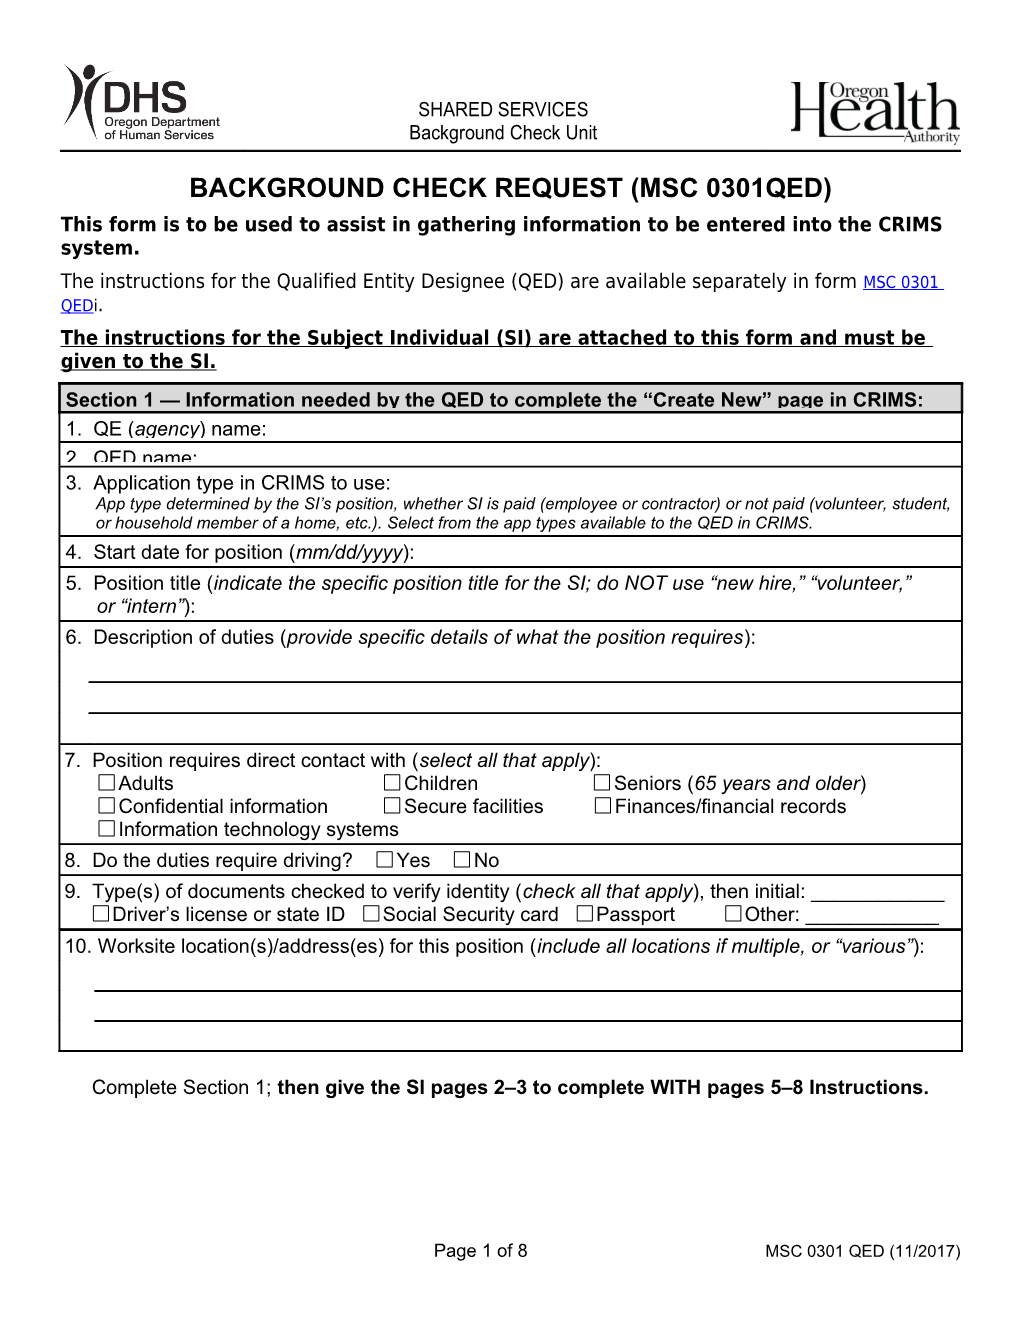 Background Check Request (301QED) 11/12